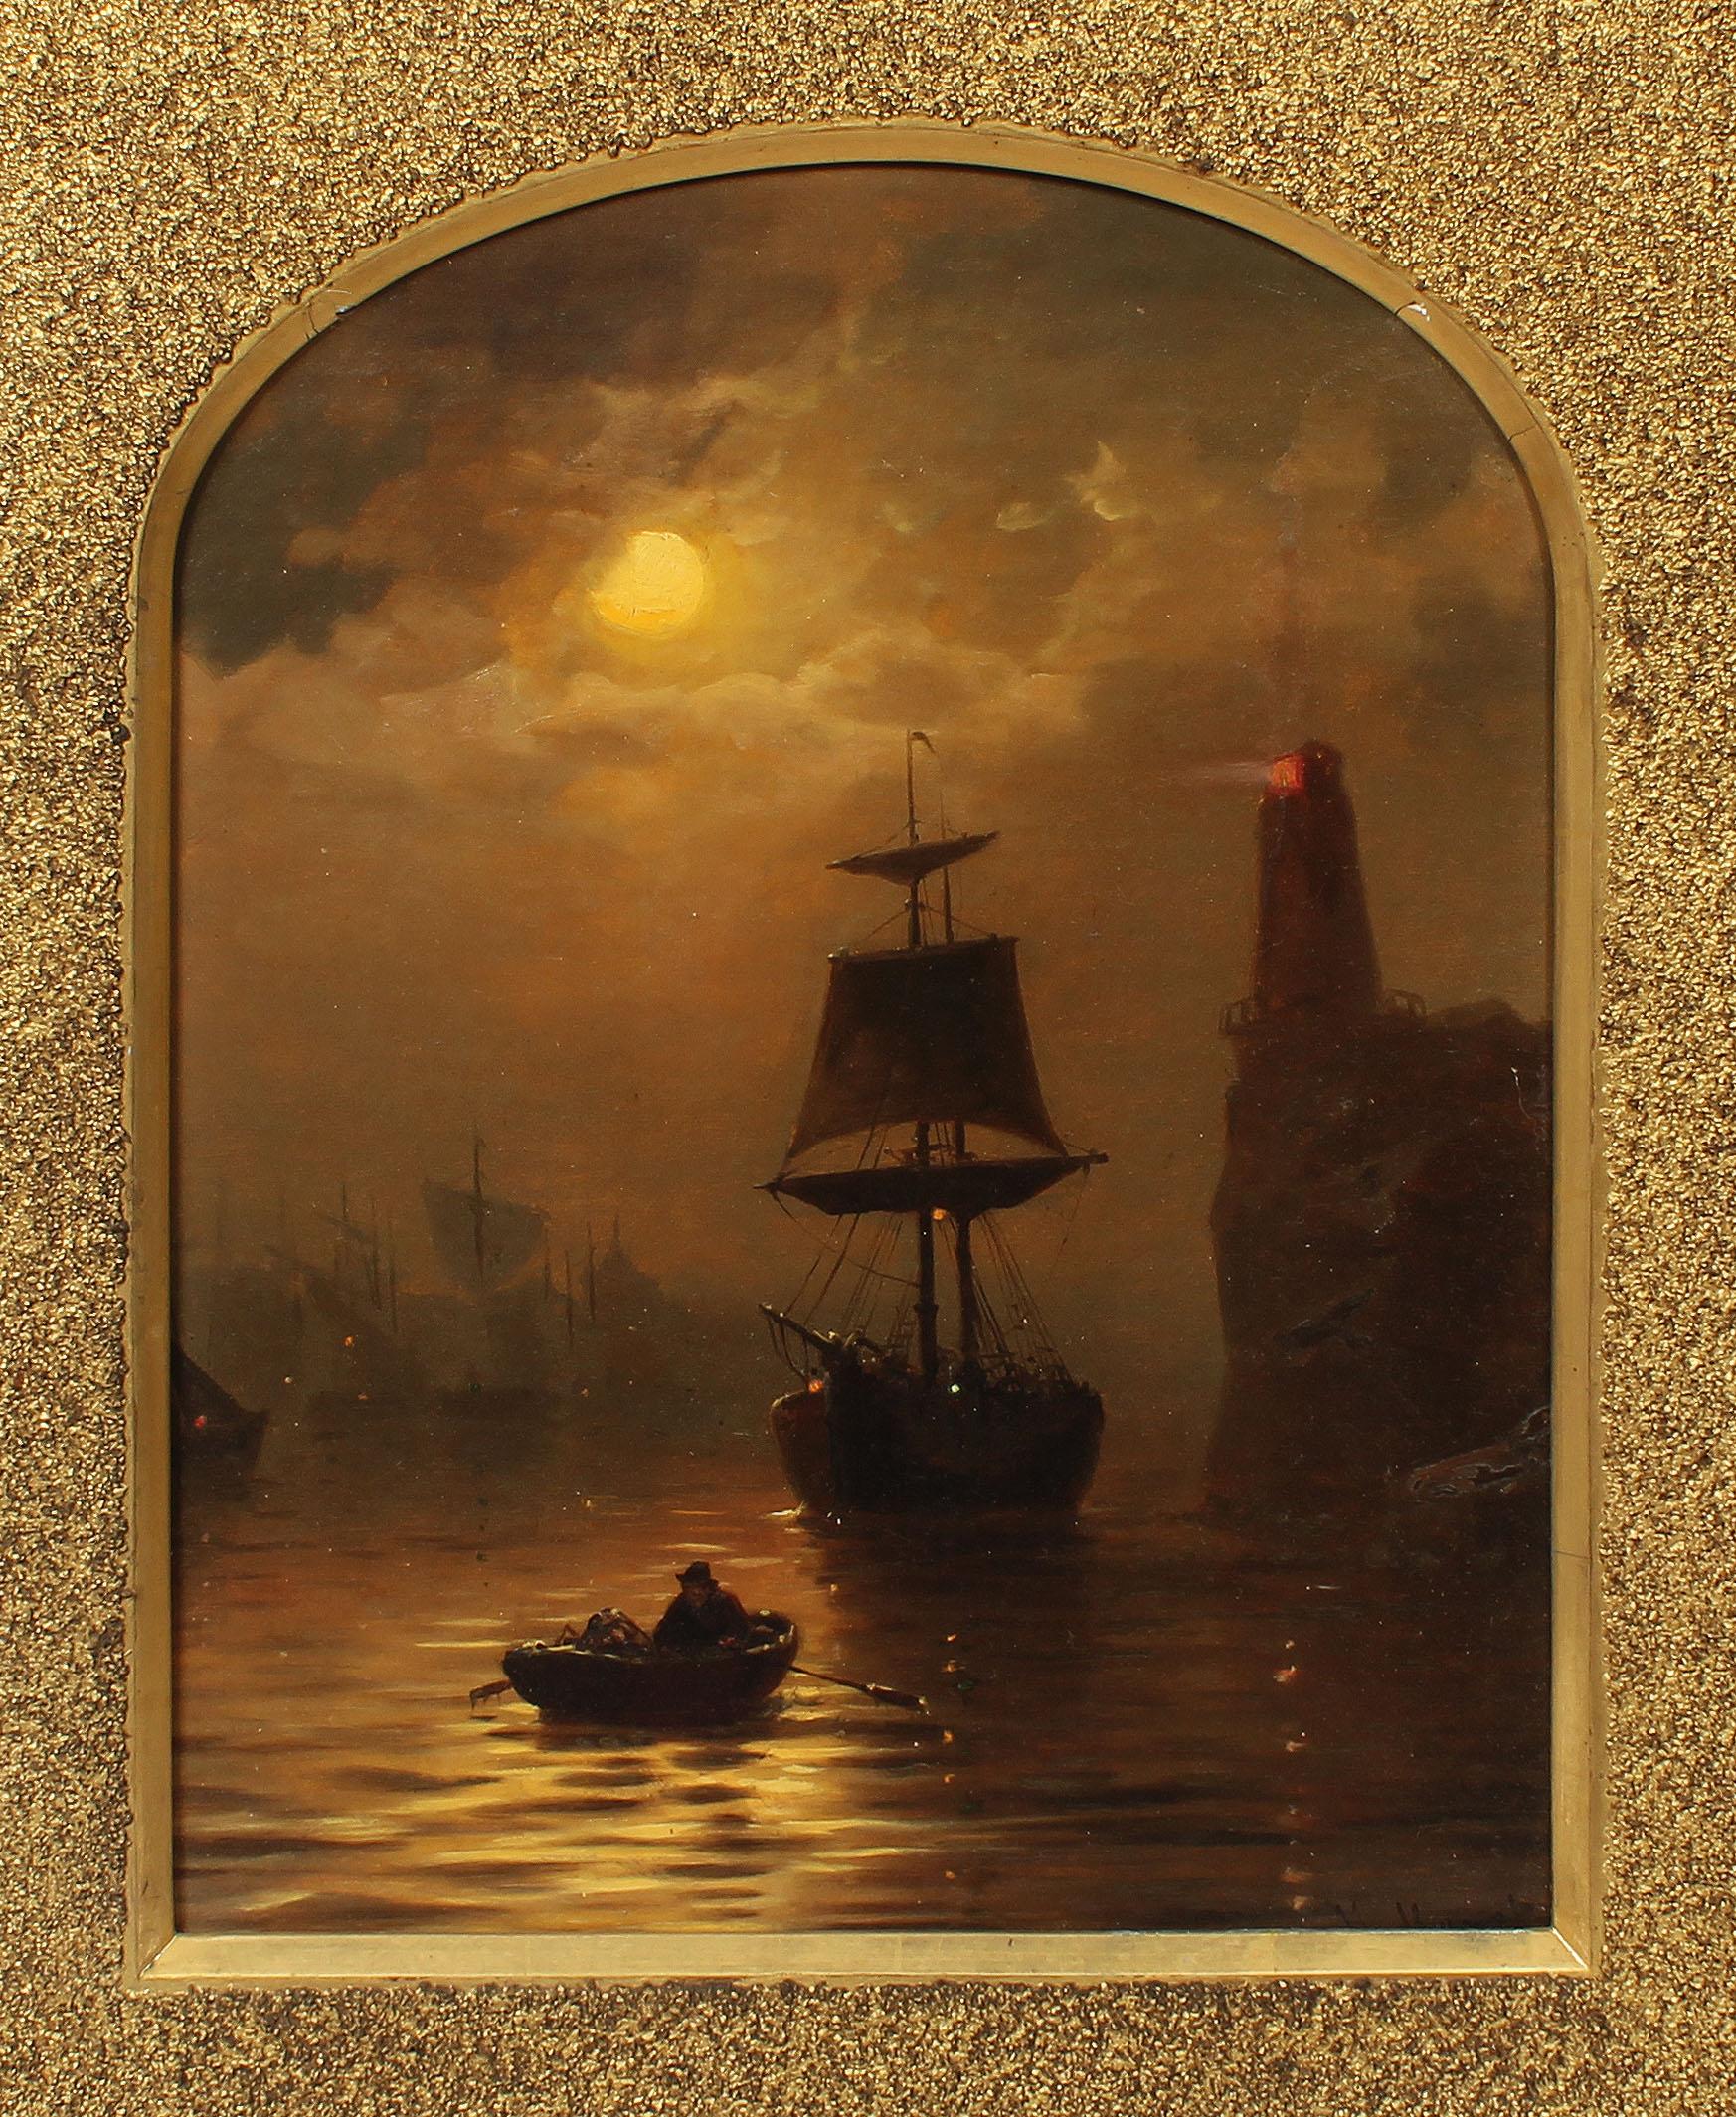 Antique American school oil painting of a luminous sunset harbor.  Oil on canvas, circa 1860. Signed lower right illegibly.  Displayed in a period giltwood frame.  Image, 16